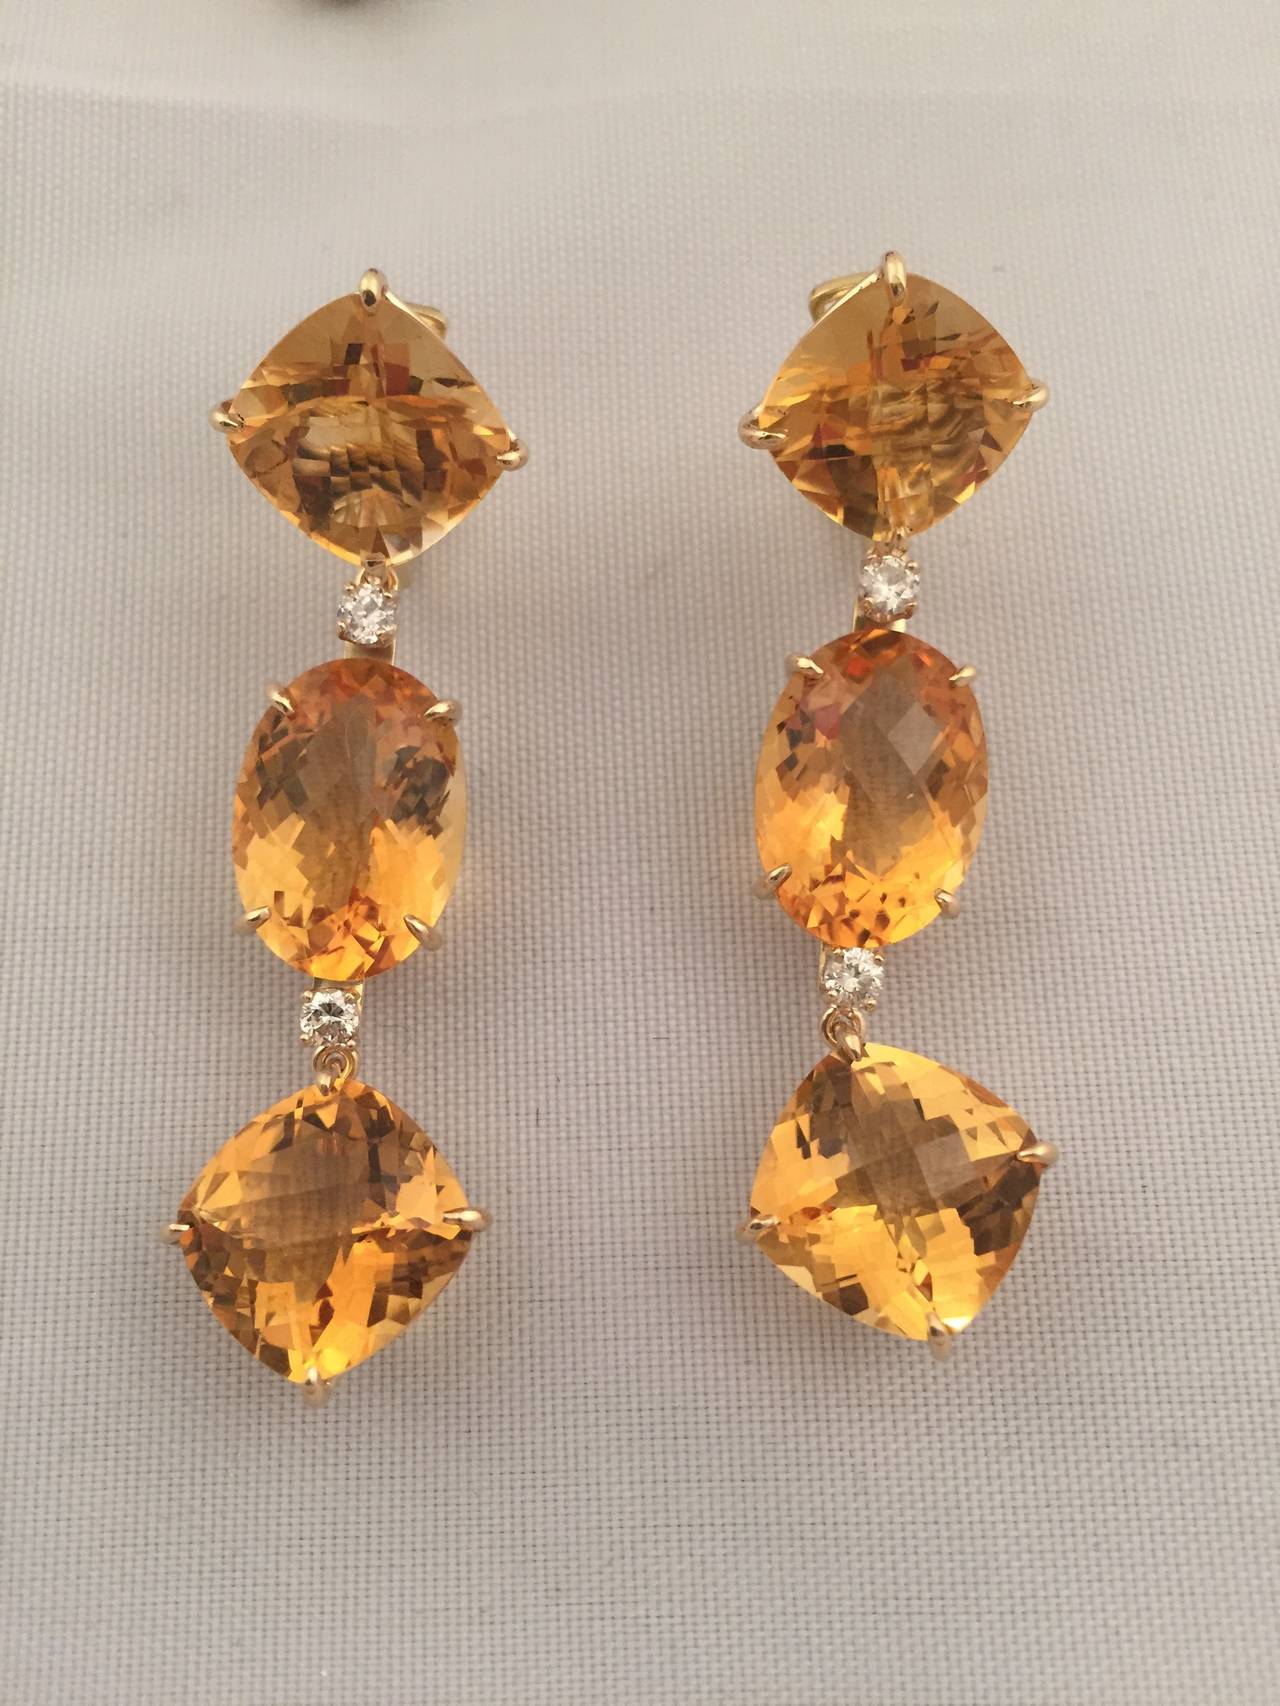 Elegant Citrine and Diamond Three Stone Drop Earrings.  18kt Yellow gold with faceted Cushion, Oval and then Cushion cut Citrine finished with four diamonds ~0.60cts.  The earrings measure  2 1/2" in length and  1/2" wide.

The earrings